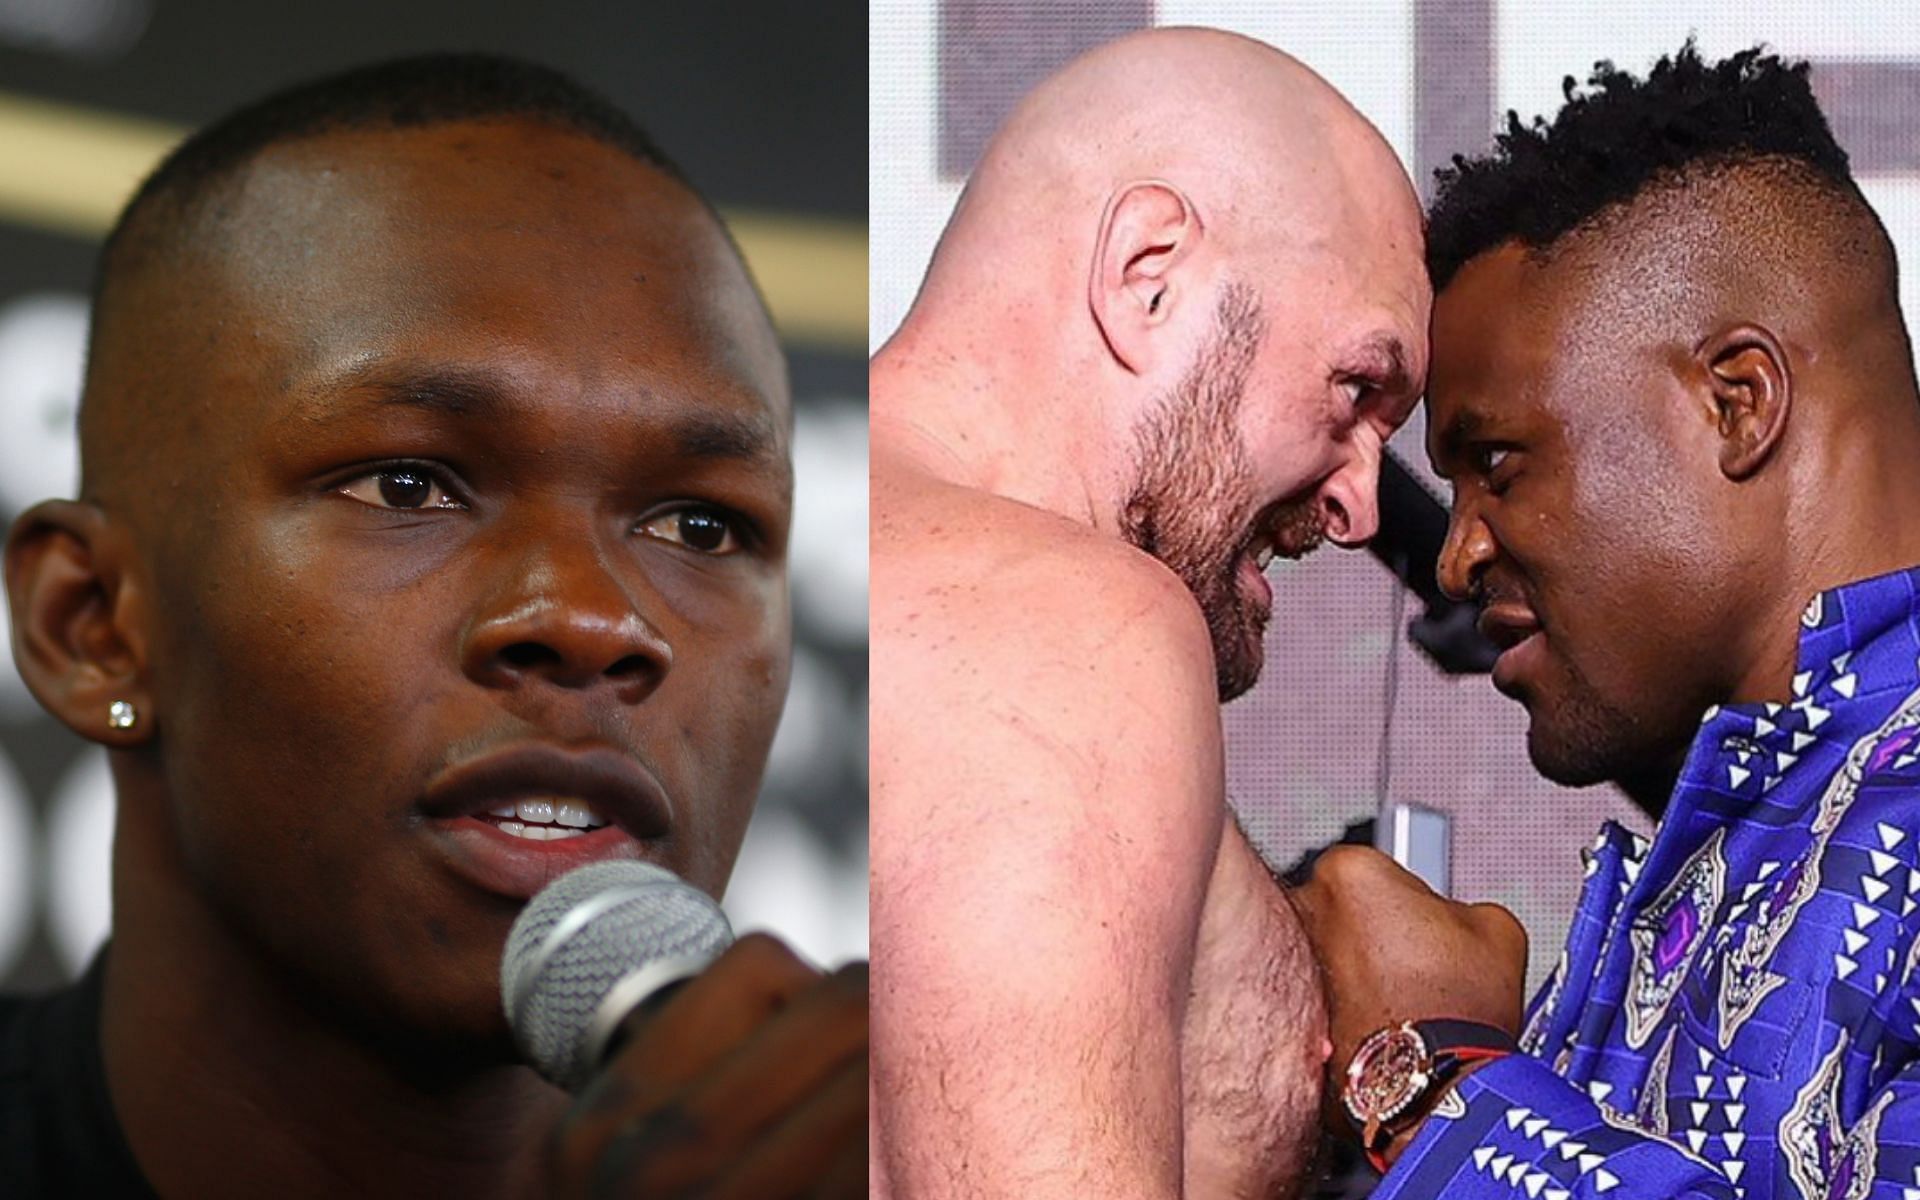 Israel Adesanya (left) and Tyson Fury vs Francis Ngannou (right). [via Getty Images and Instagram @toprank]